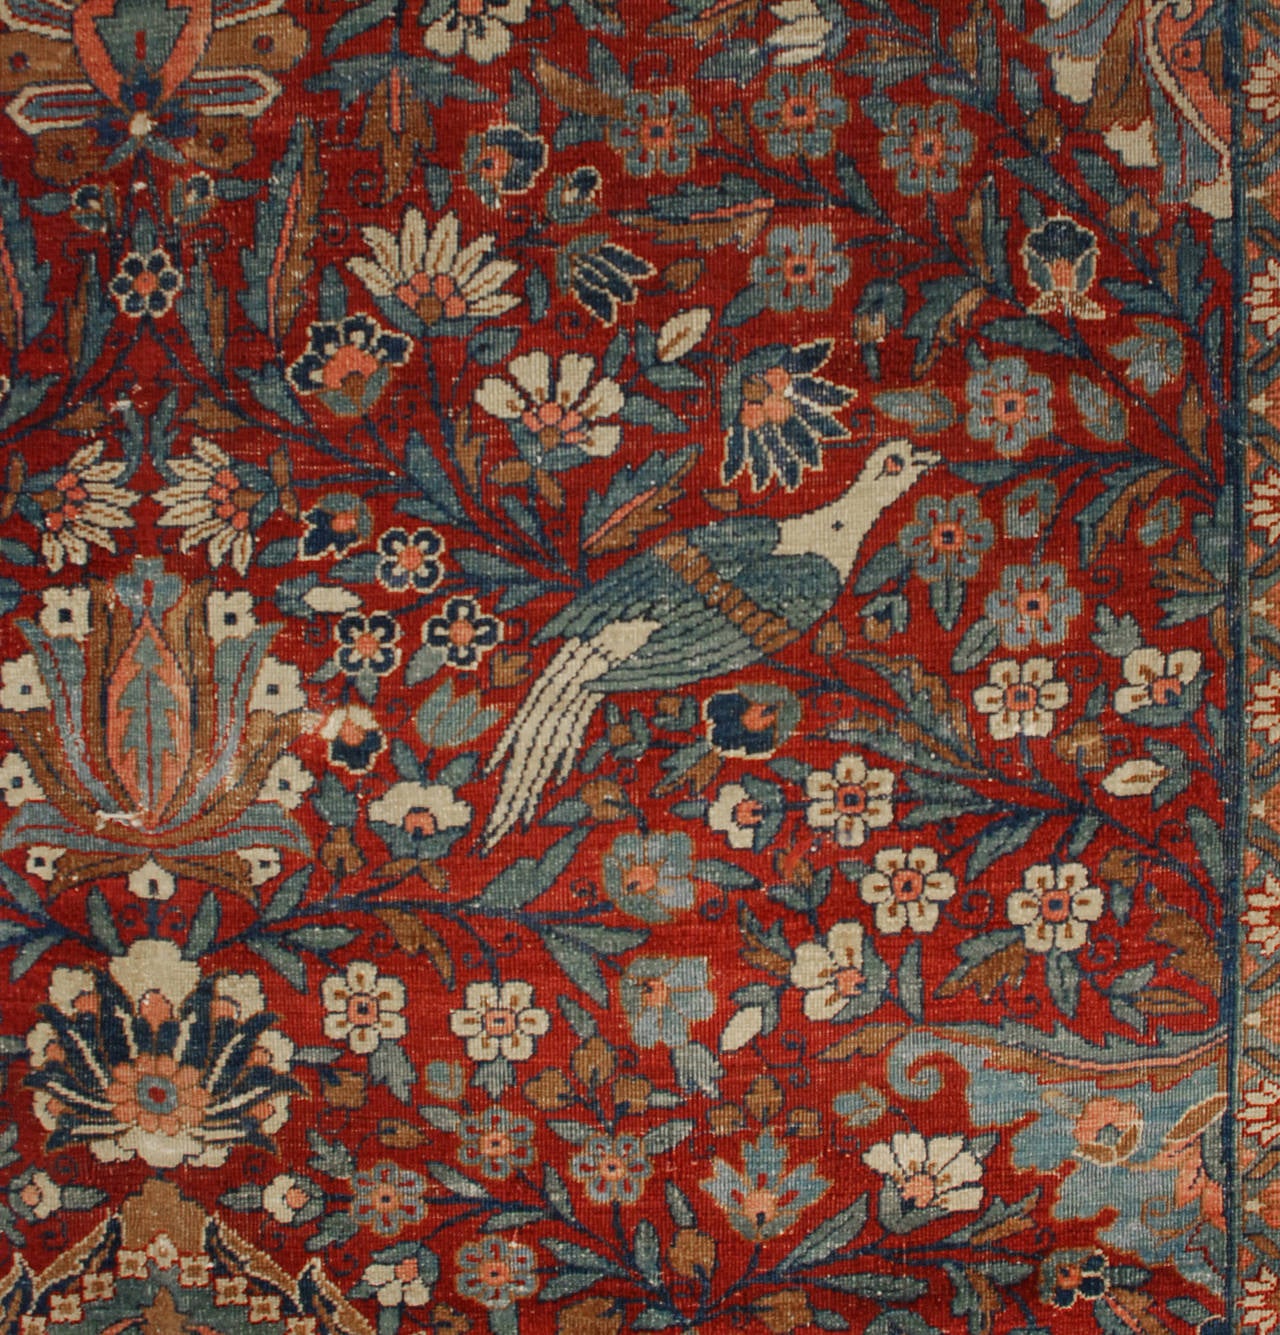 A gorgeous early 20th century Persian Tabriz rug with an intricately woven tree-of-life pattern on a rich crimson background, with birds-of-paradise perched on the branches, surrounded by multiple complementary floral borders.